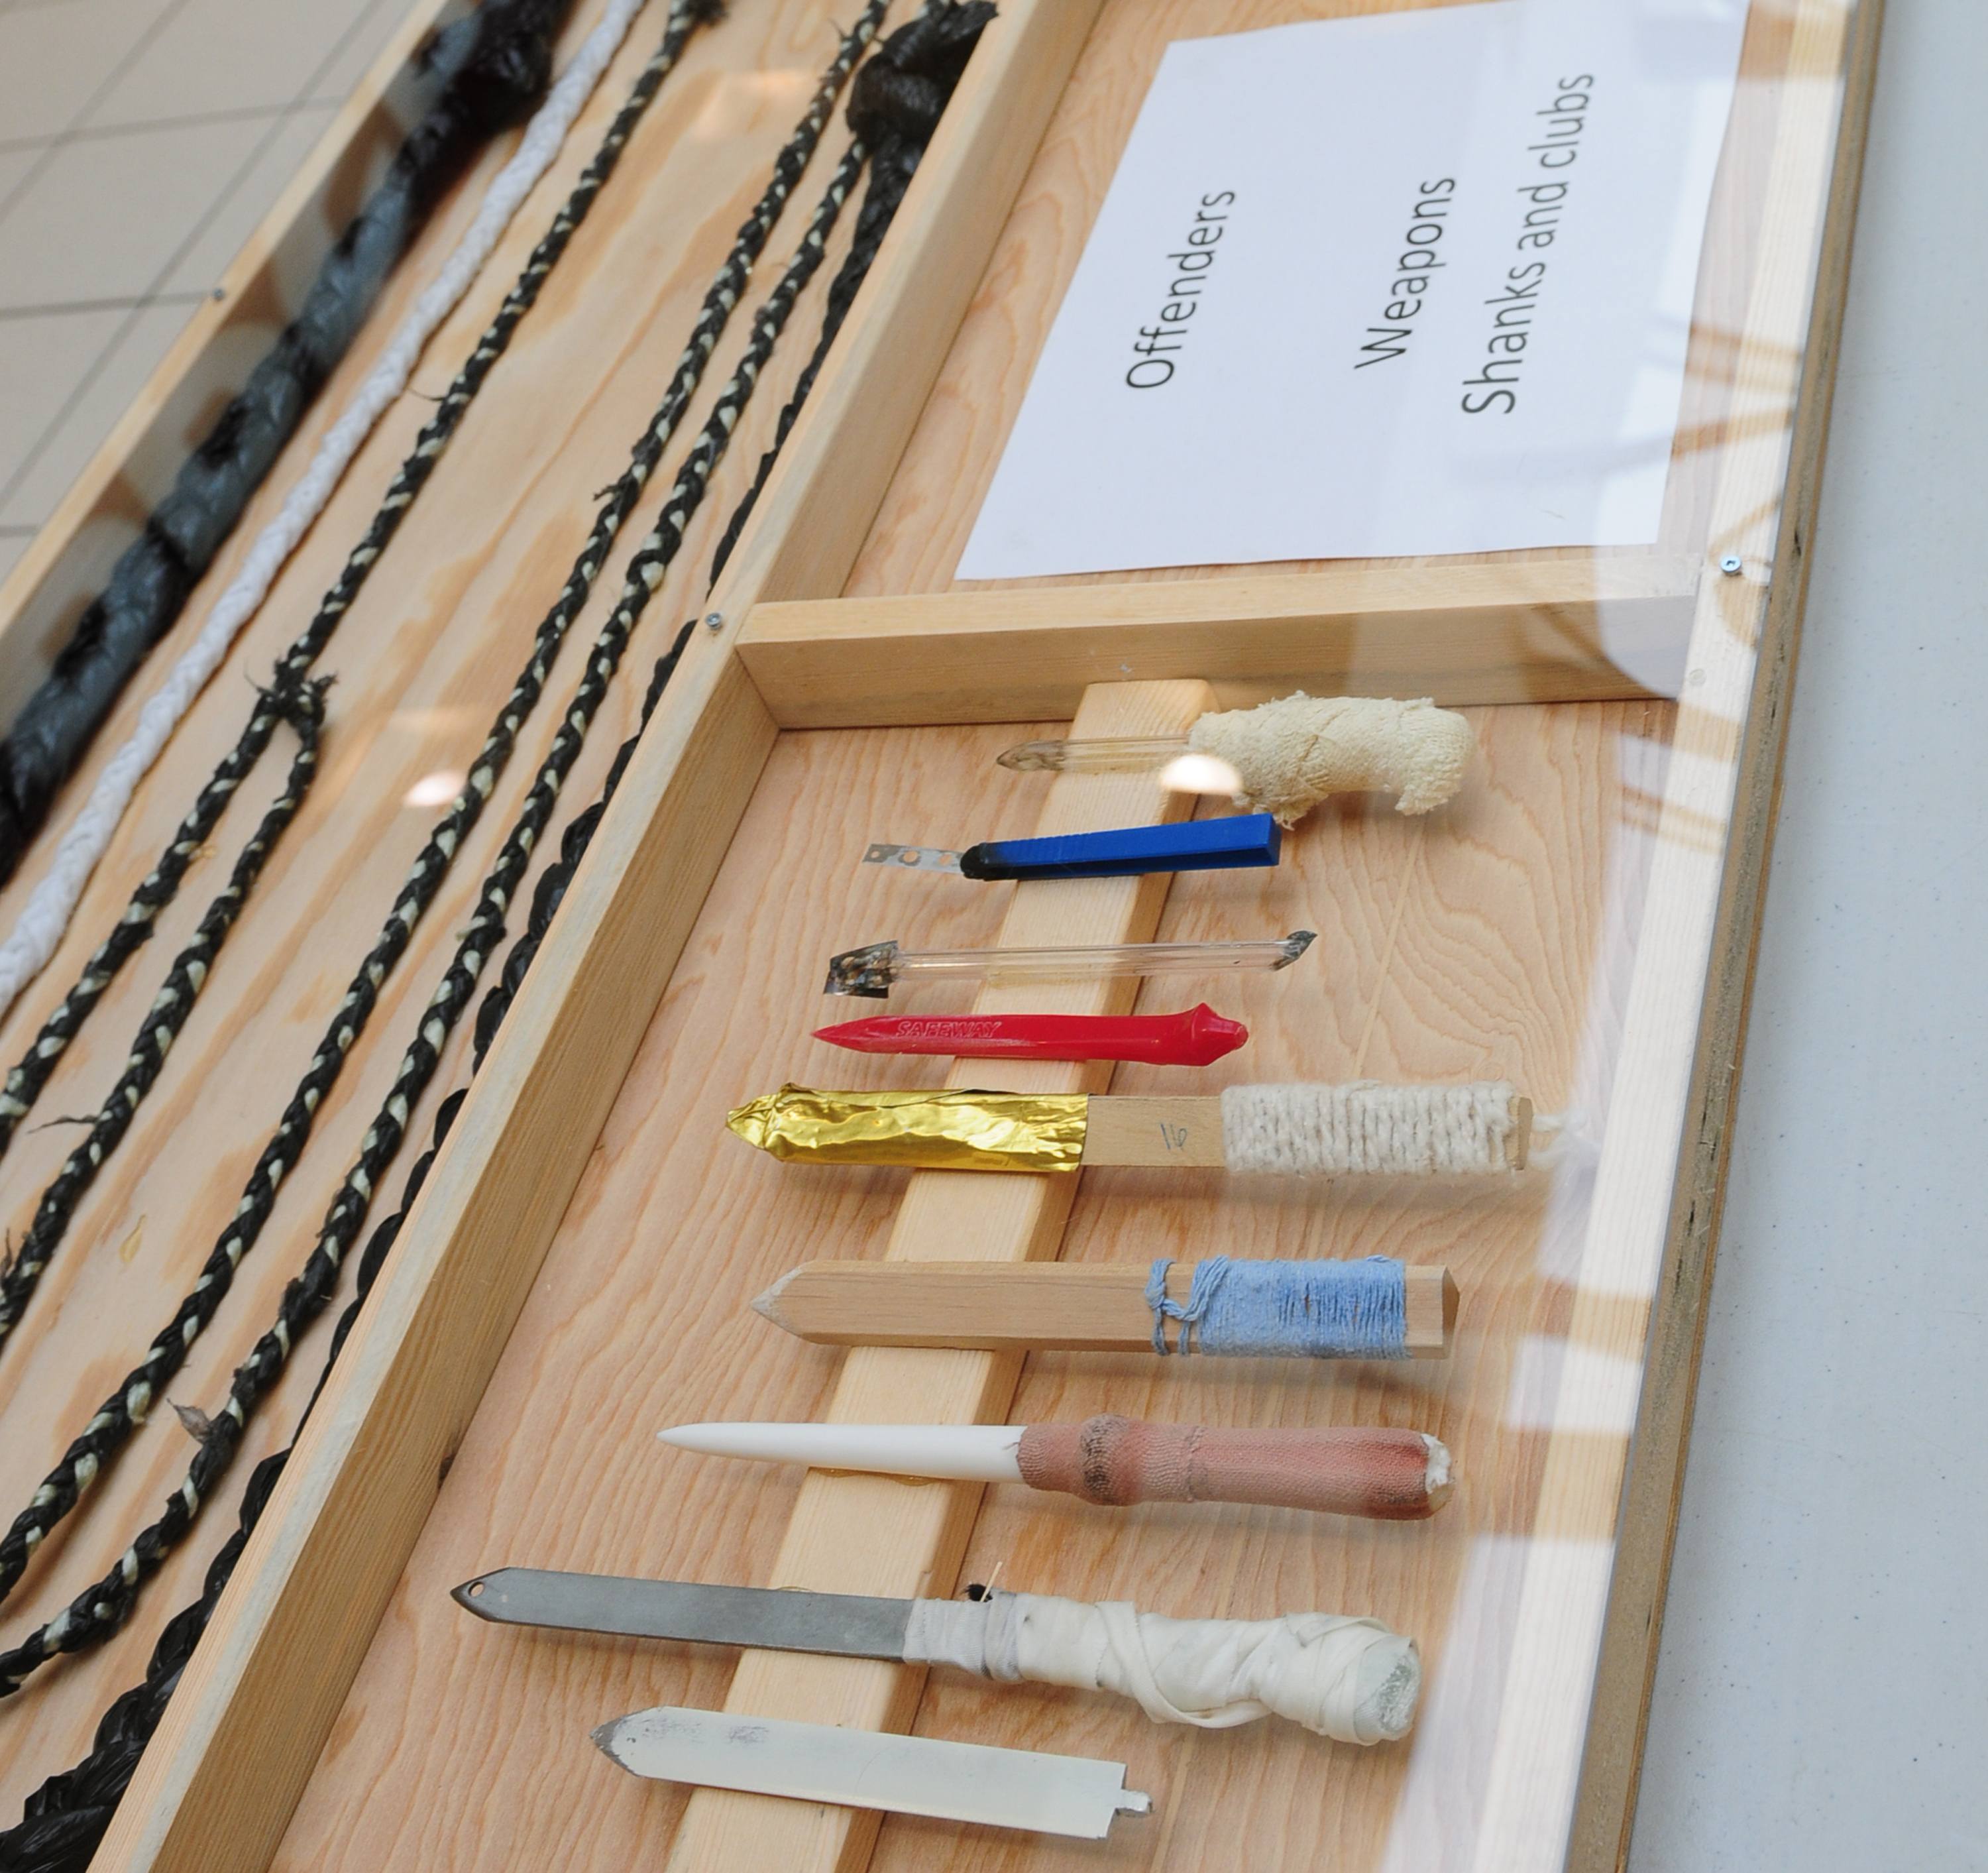 HAND MADE- A few of the weapons that were confiscated from people who have tried to smuggle them into the Red Deer Remand Centre were on display at the Bower Mall as well as probation programming displays Monday morning.